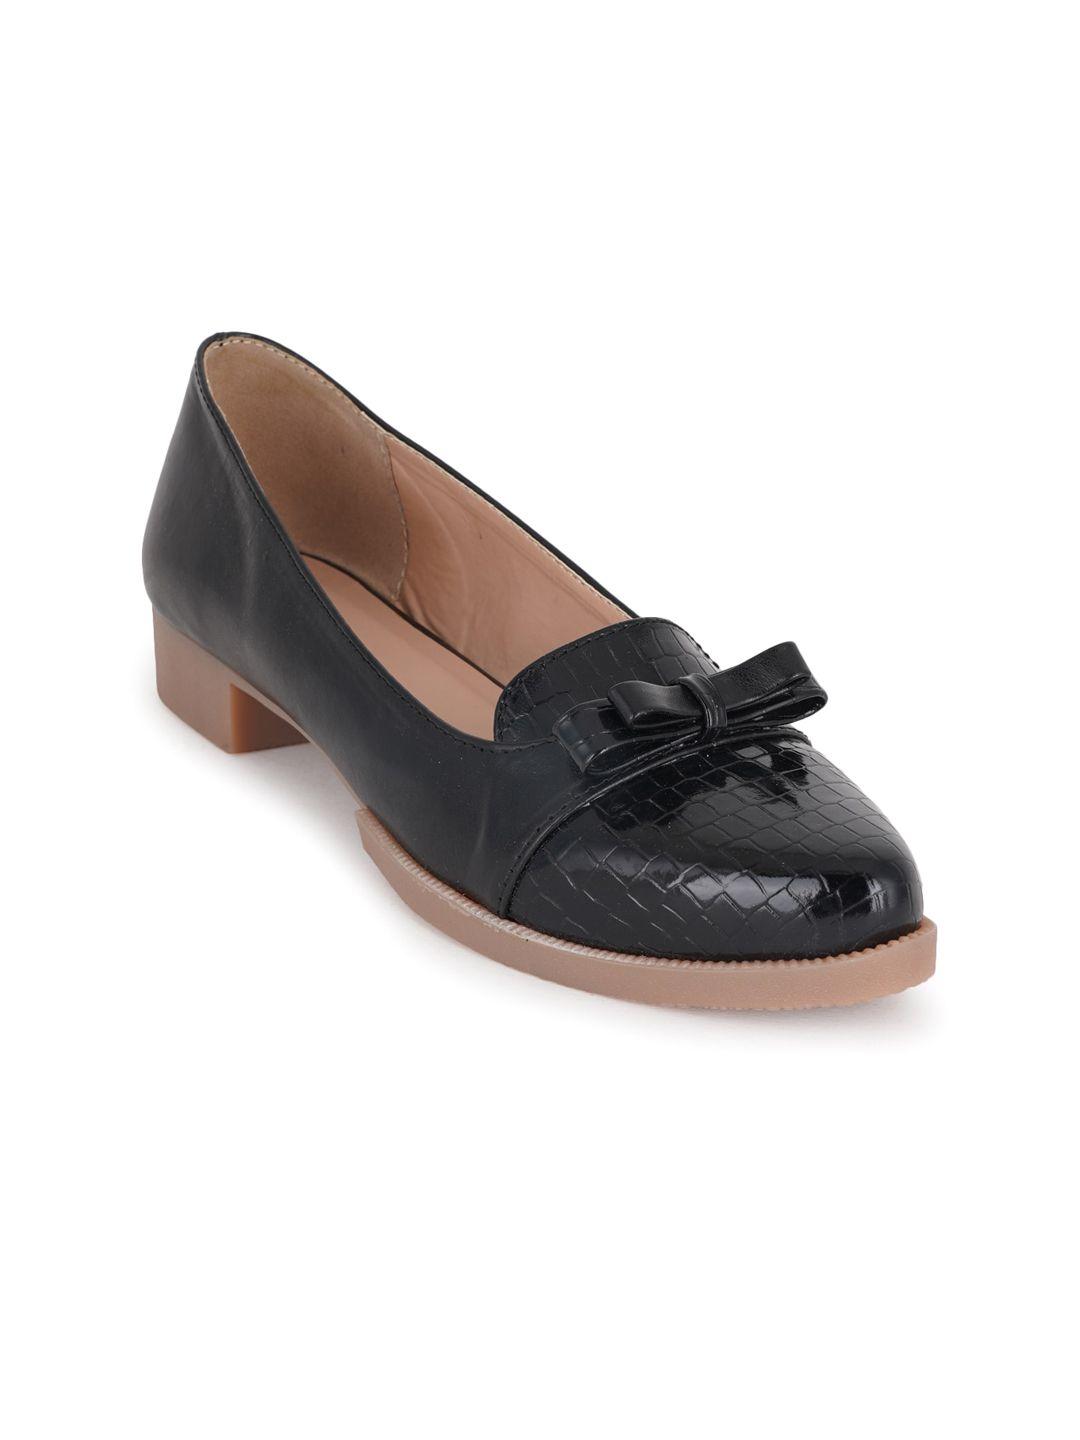 walkfree pointed toe textured ballerinas with bows